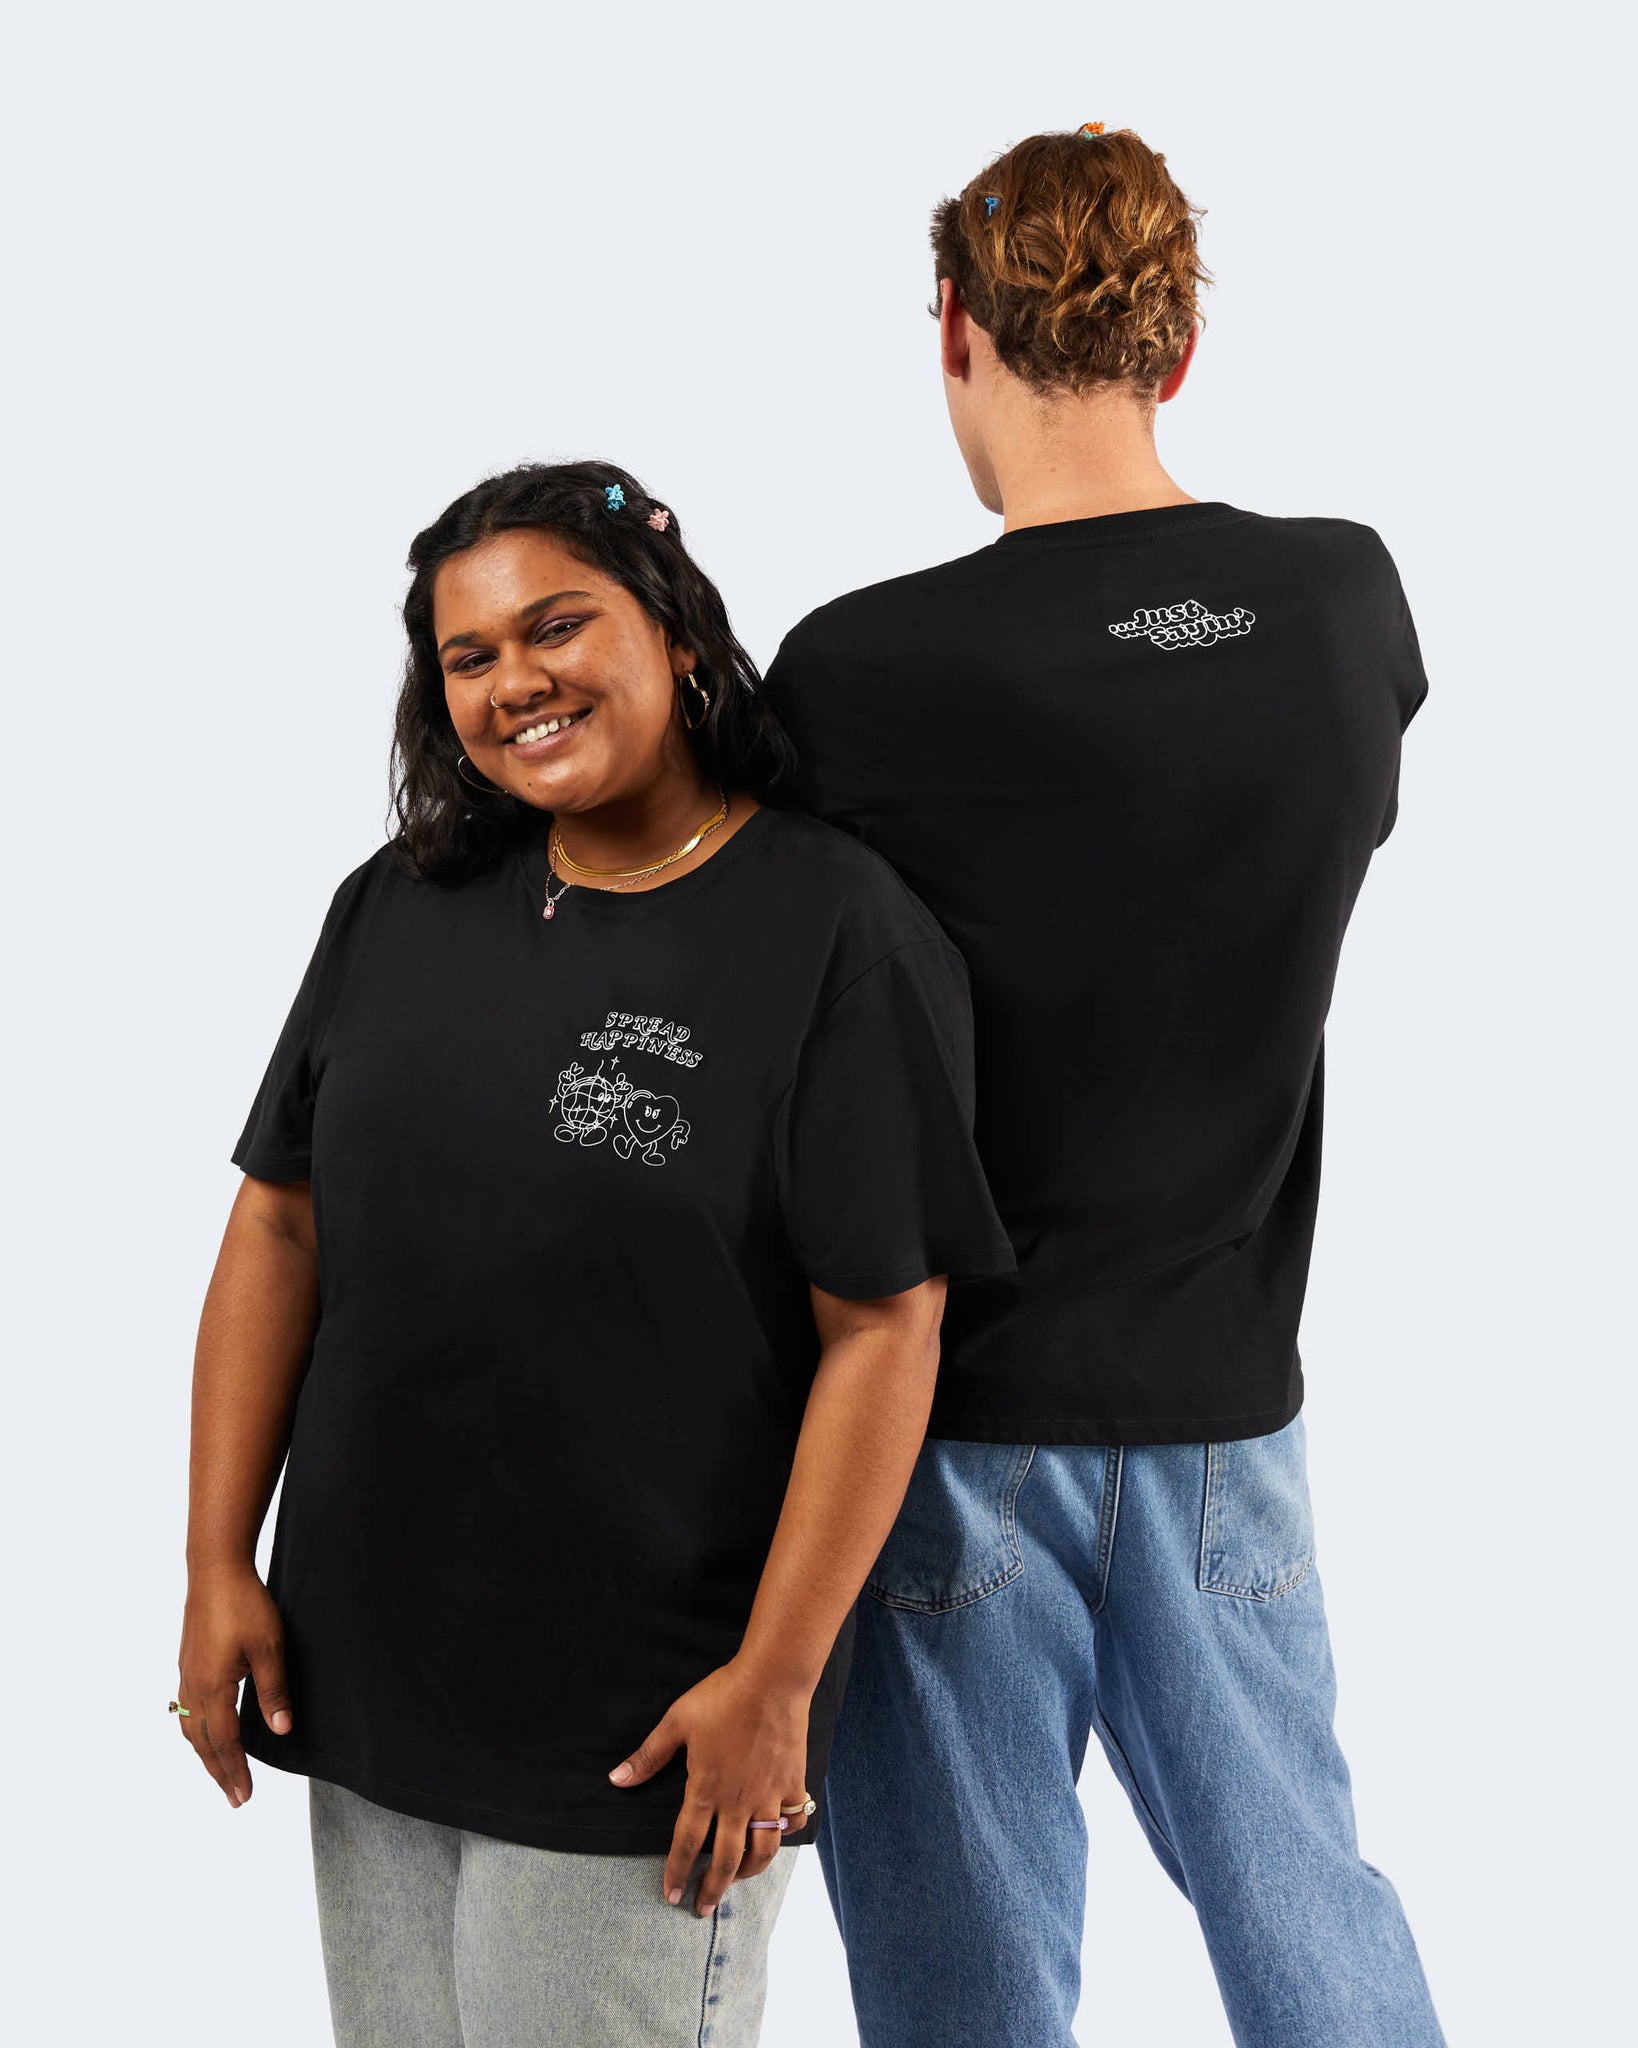 Spread Happiness Graphic Tee - Black & White